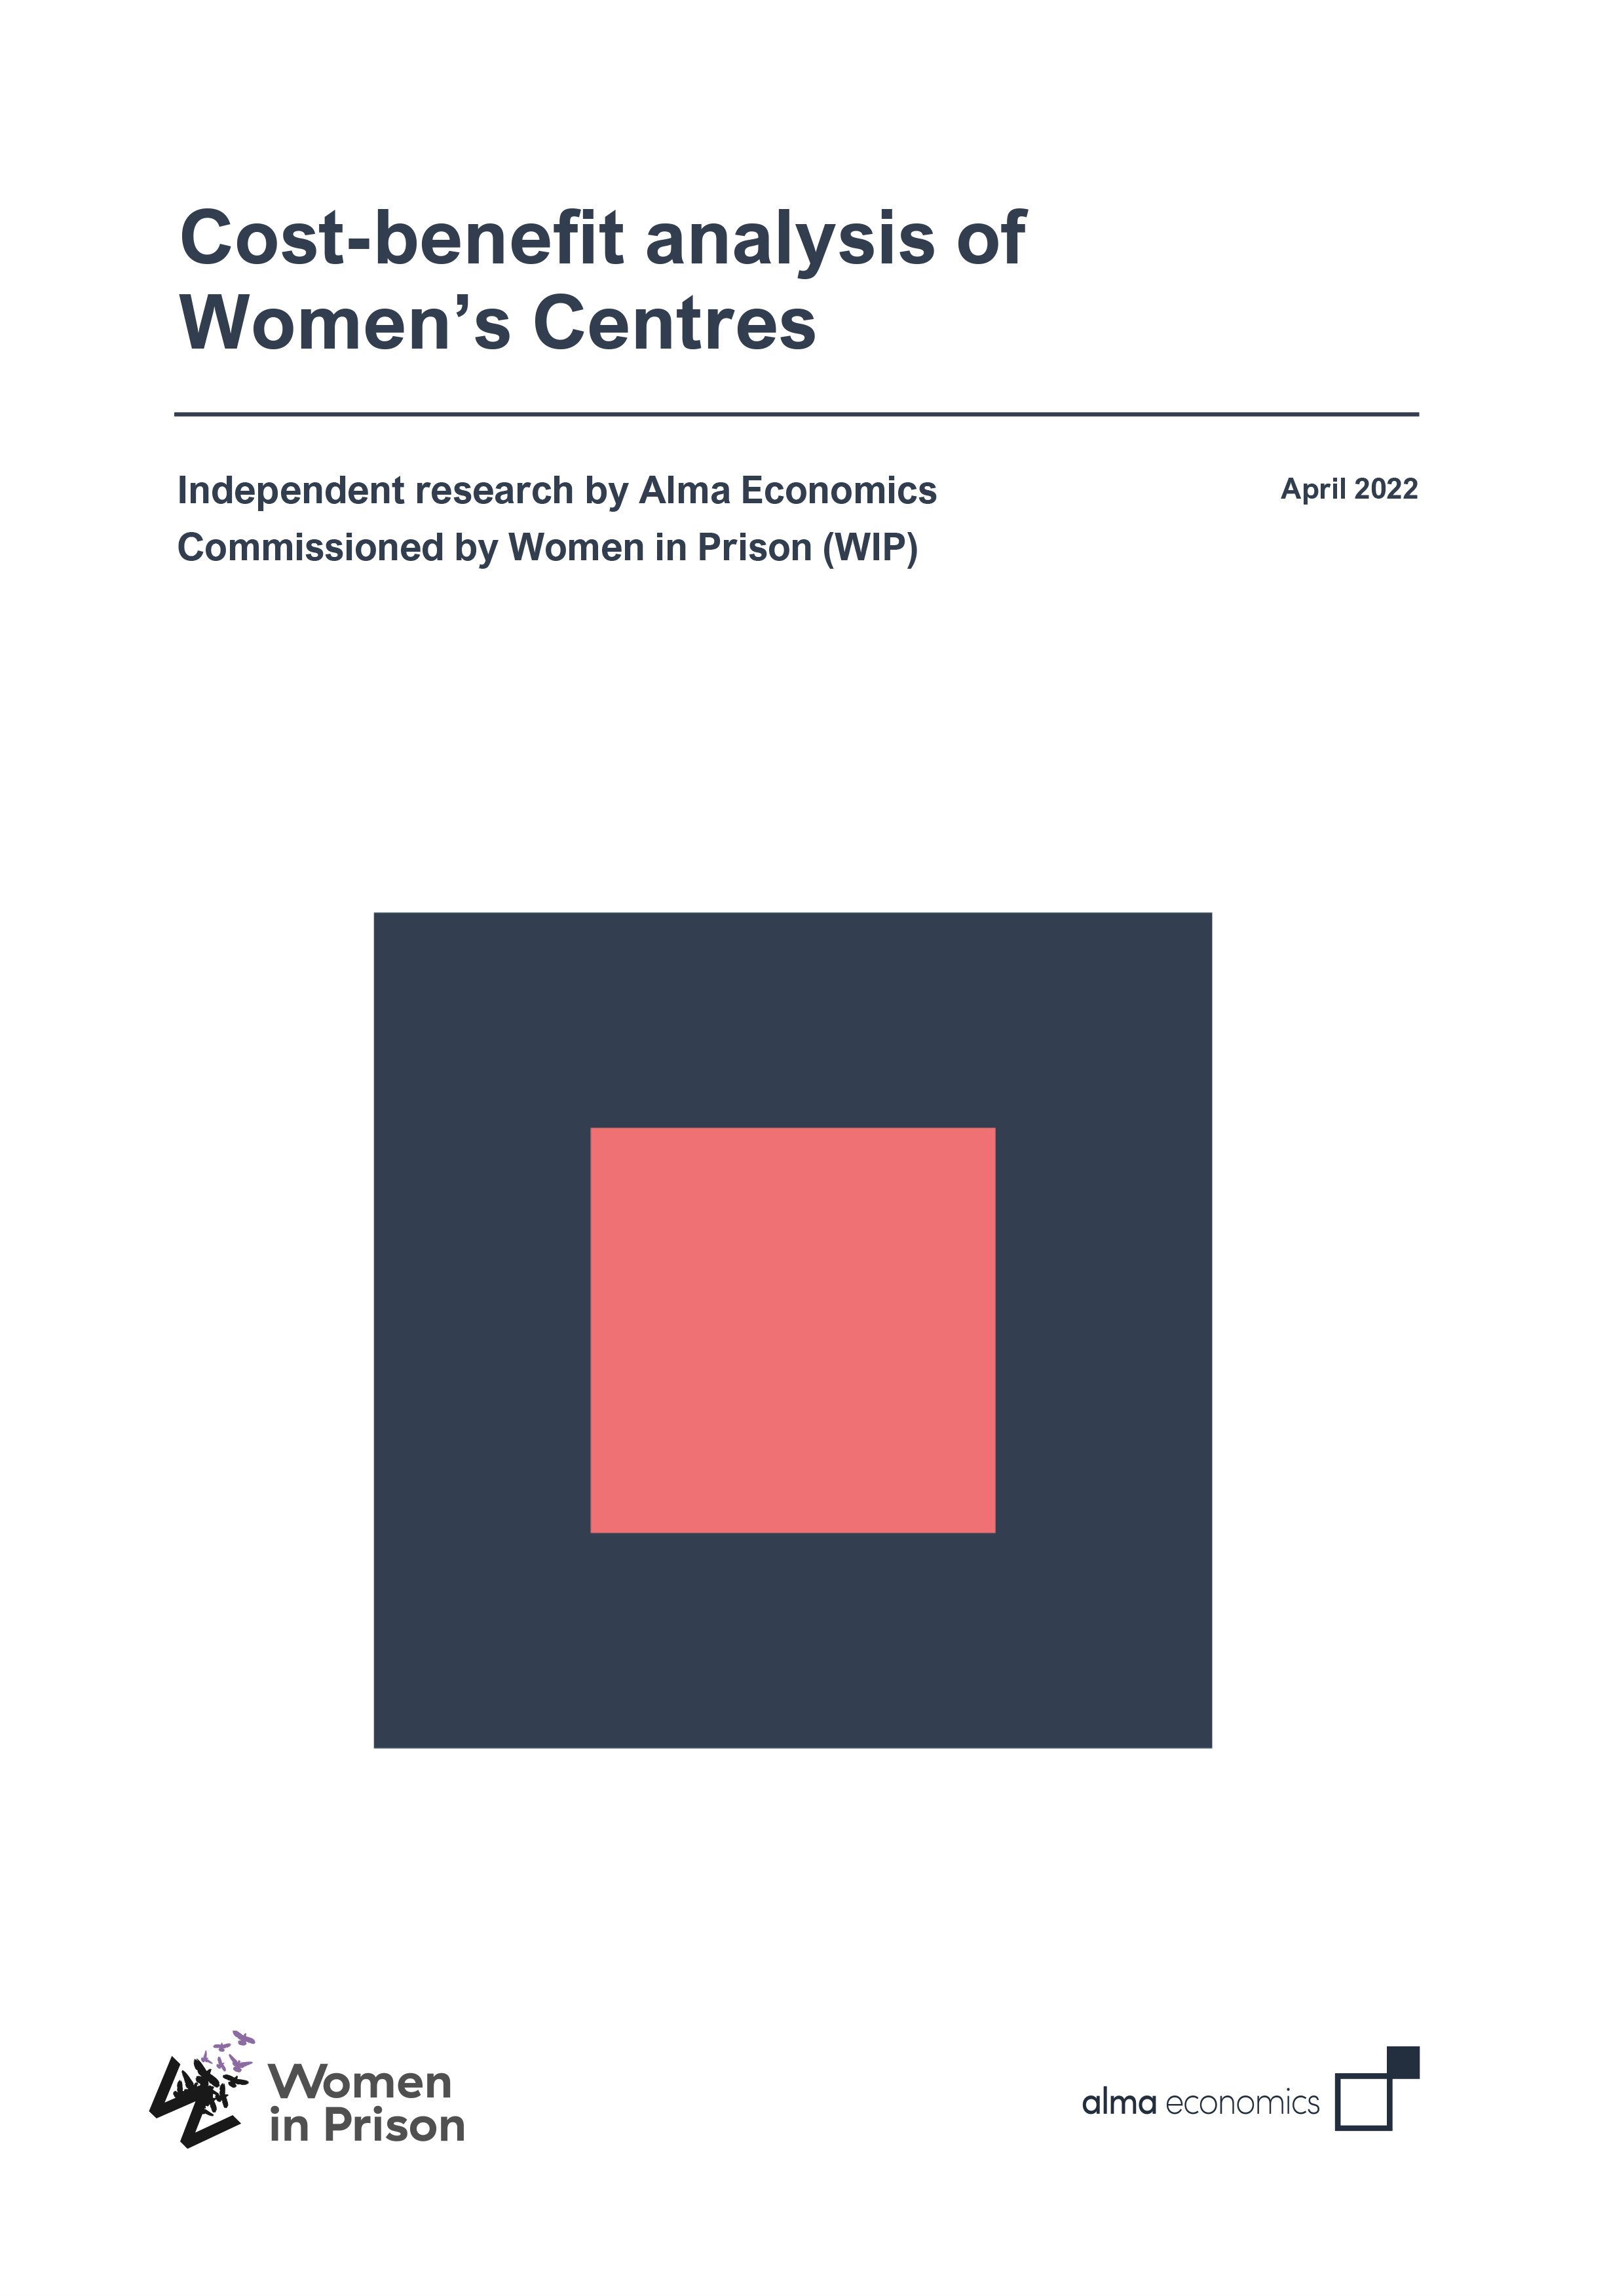 WiP - Cost Benefit Analysis of Women's Centres_Alma cover.jpg